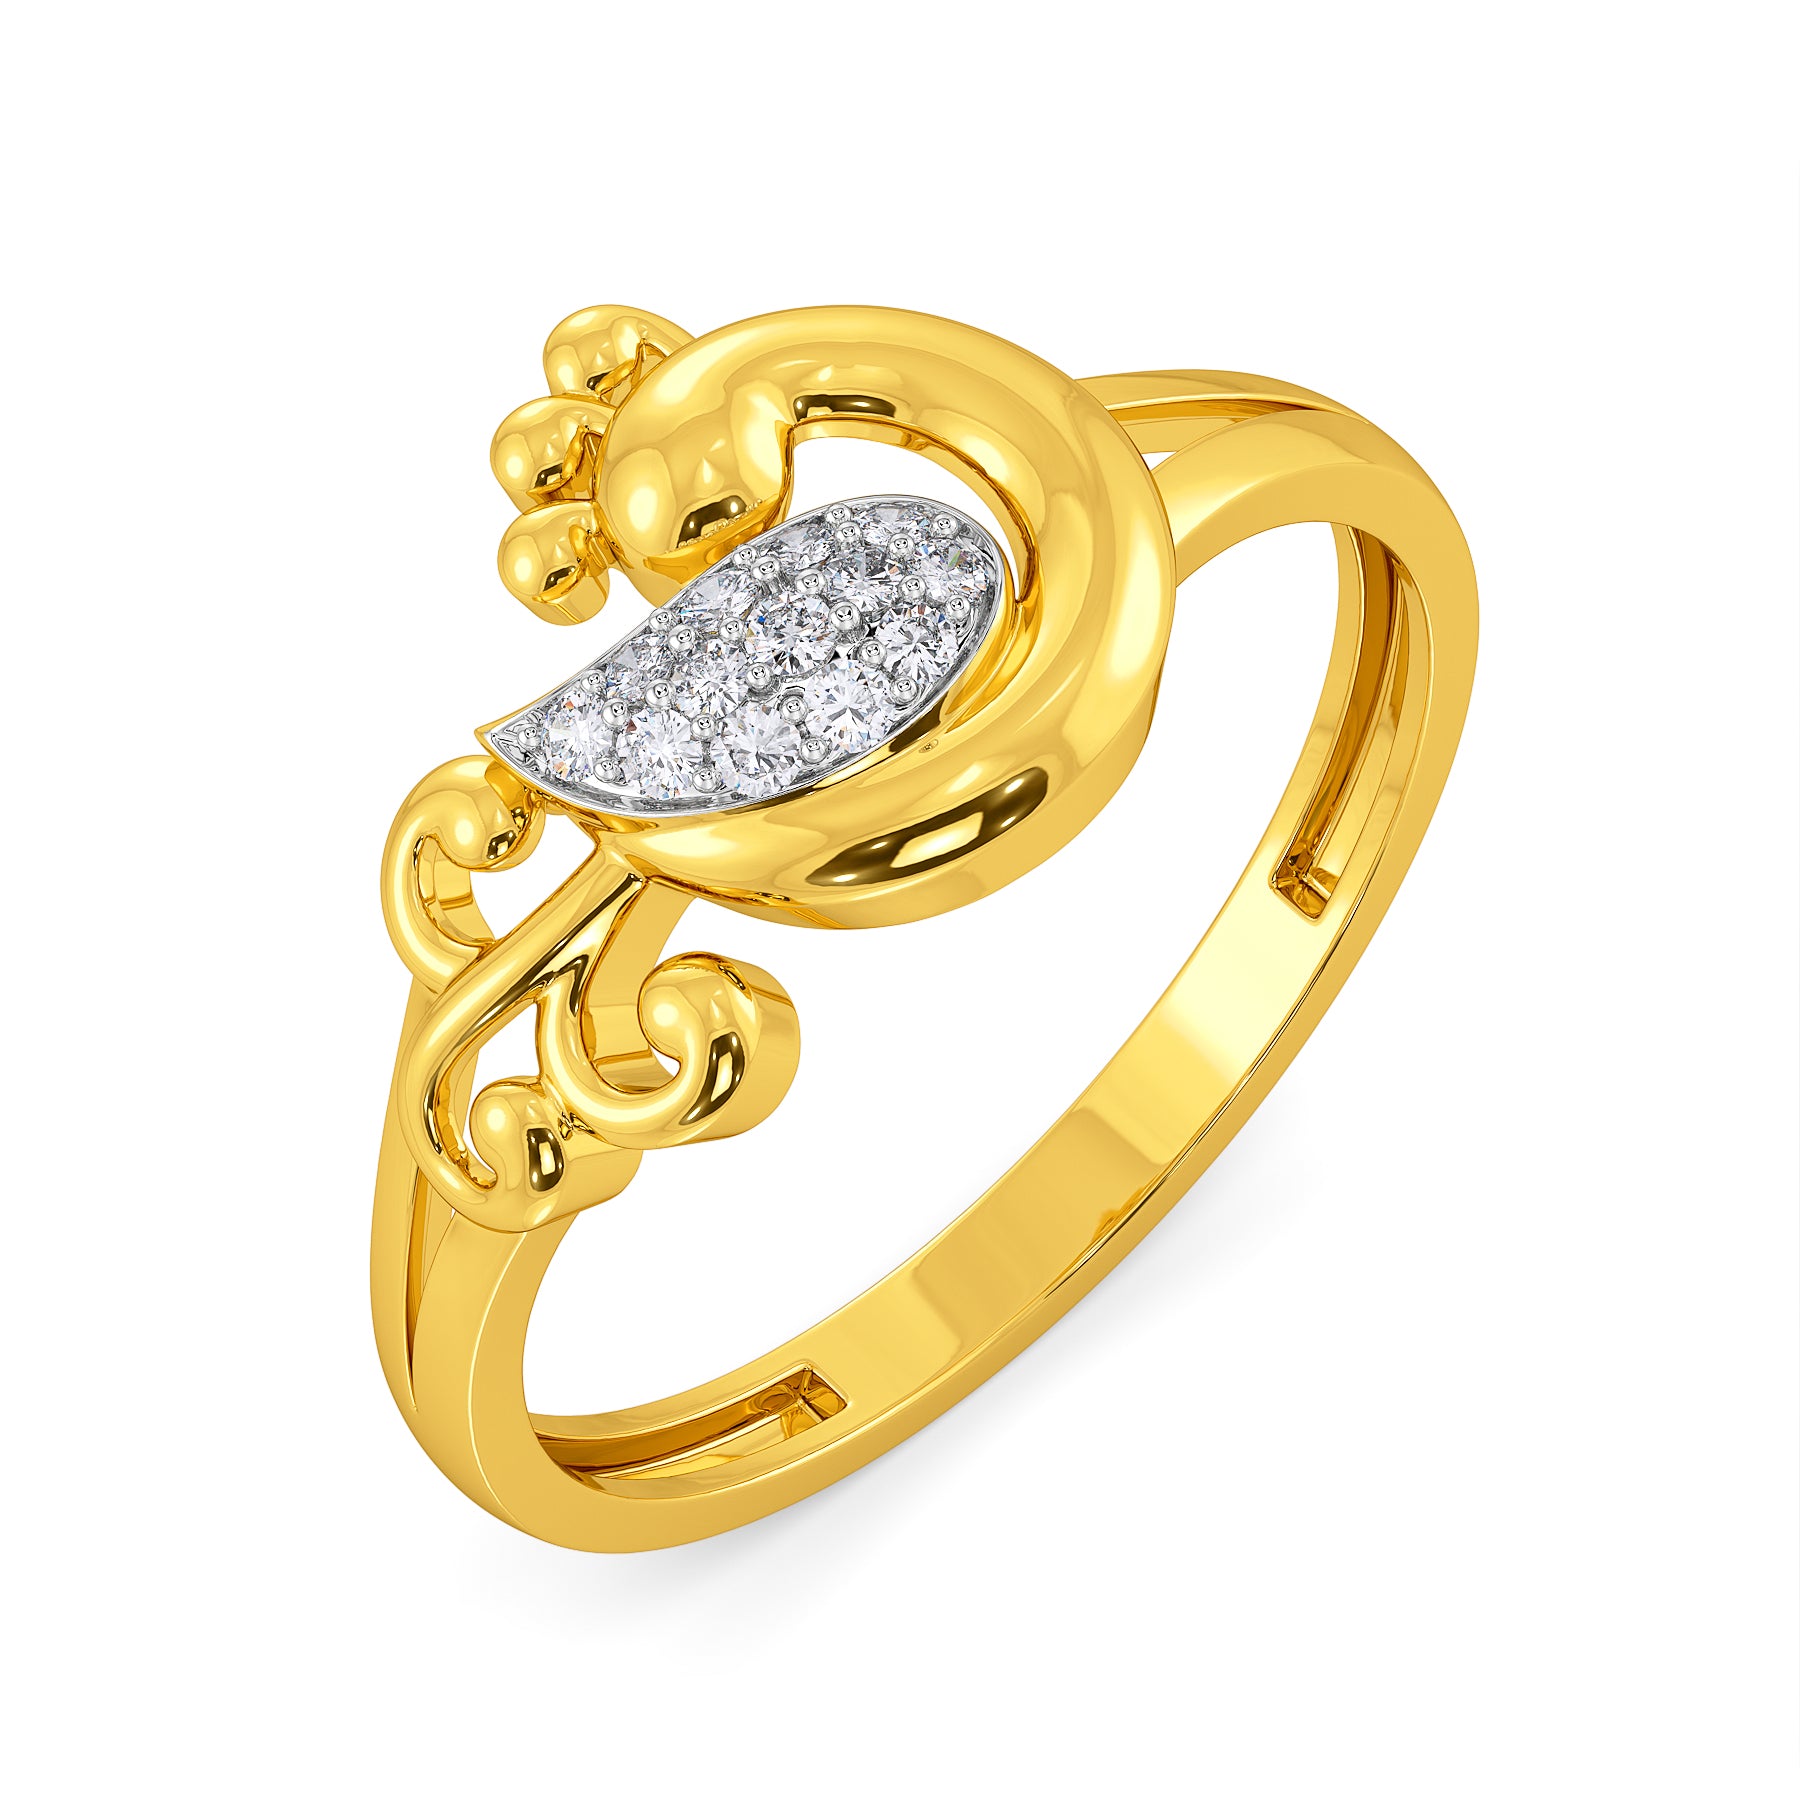 Ladies Gold Rings at Best Price in Basti | The Rewa Traders and Exporters